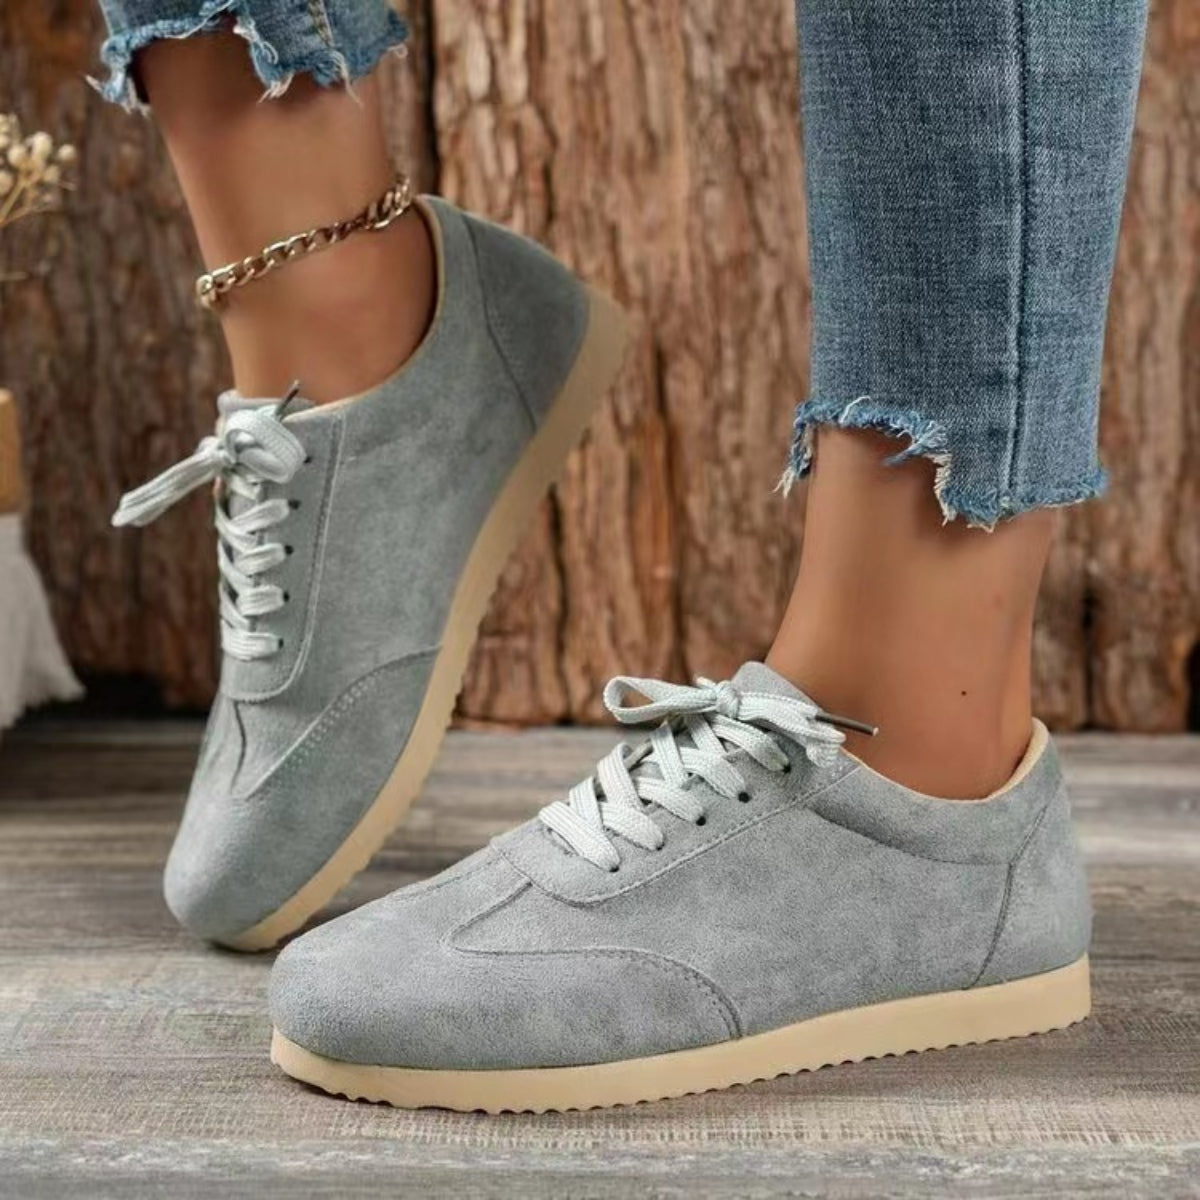 SoComfy Suede Lace-Up Flat Sneakers